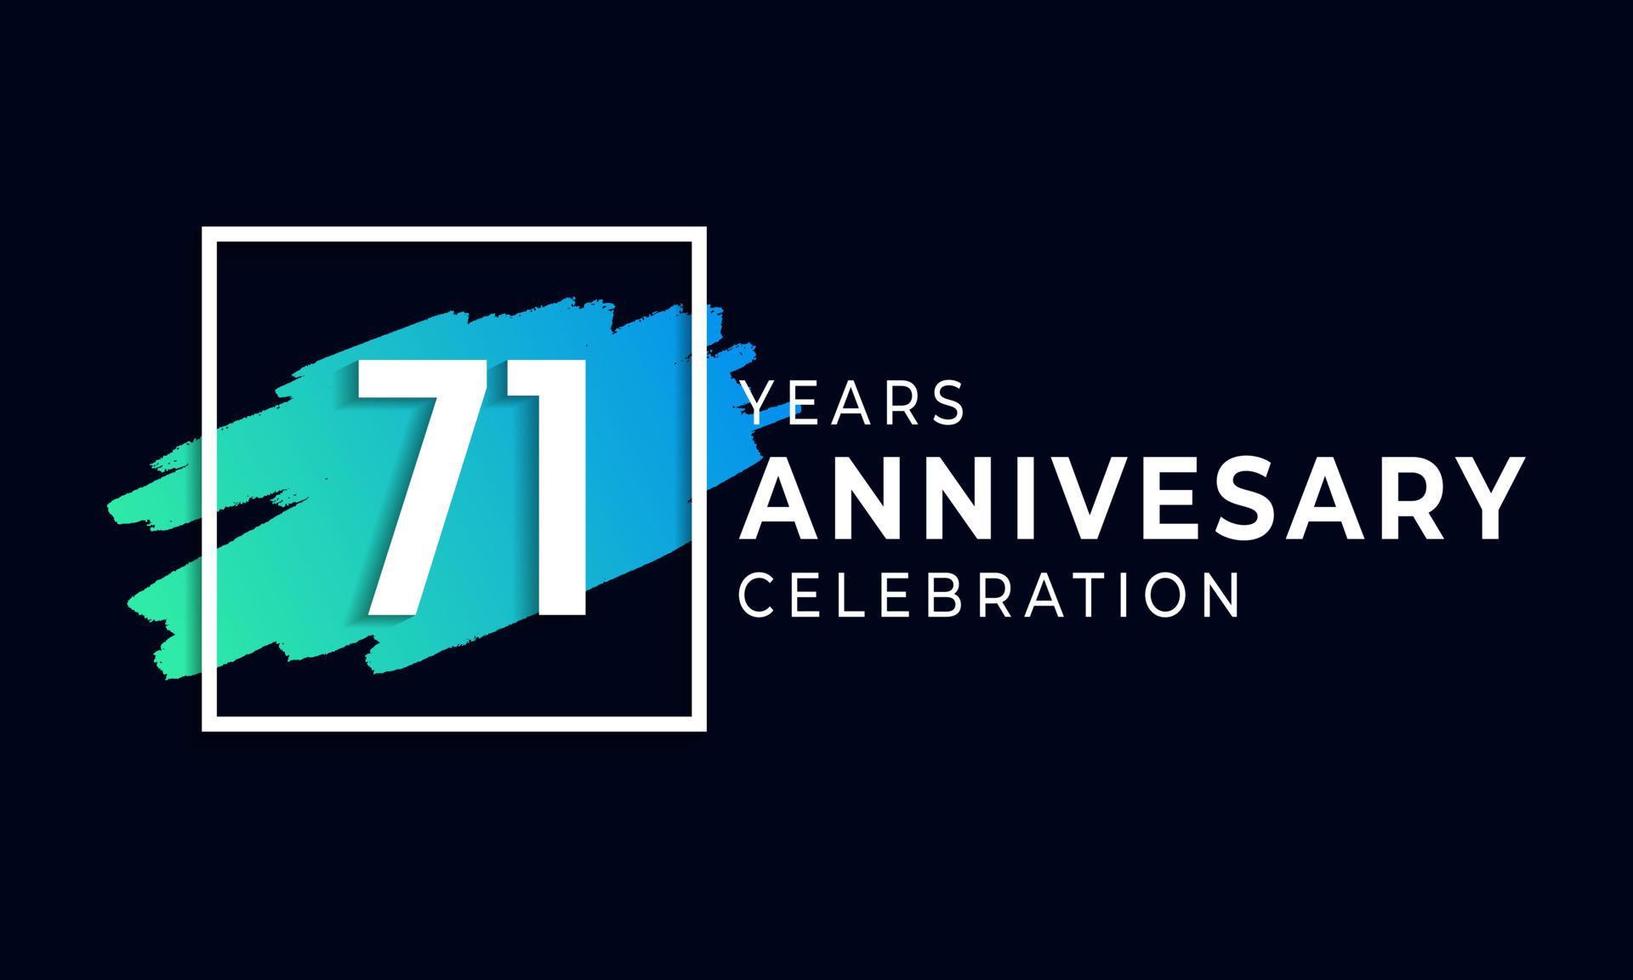 71 Year Anniversary Celebration with Blue Brush and Square Symbol. Happy Anniversary Greeting Celebrates Event Isolated on Black Background vector